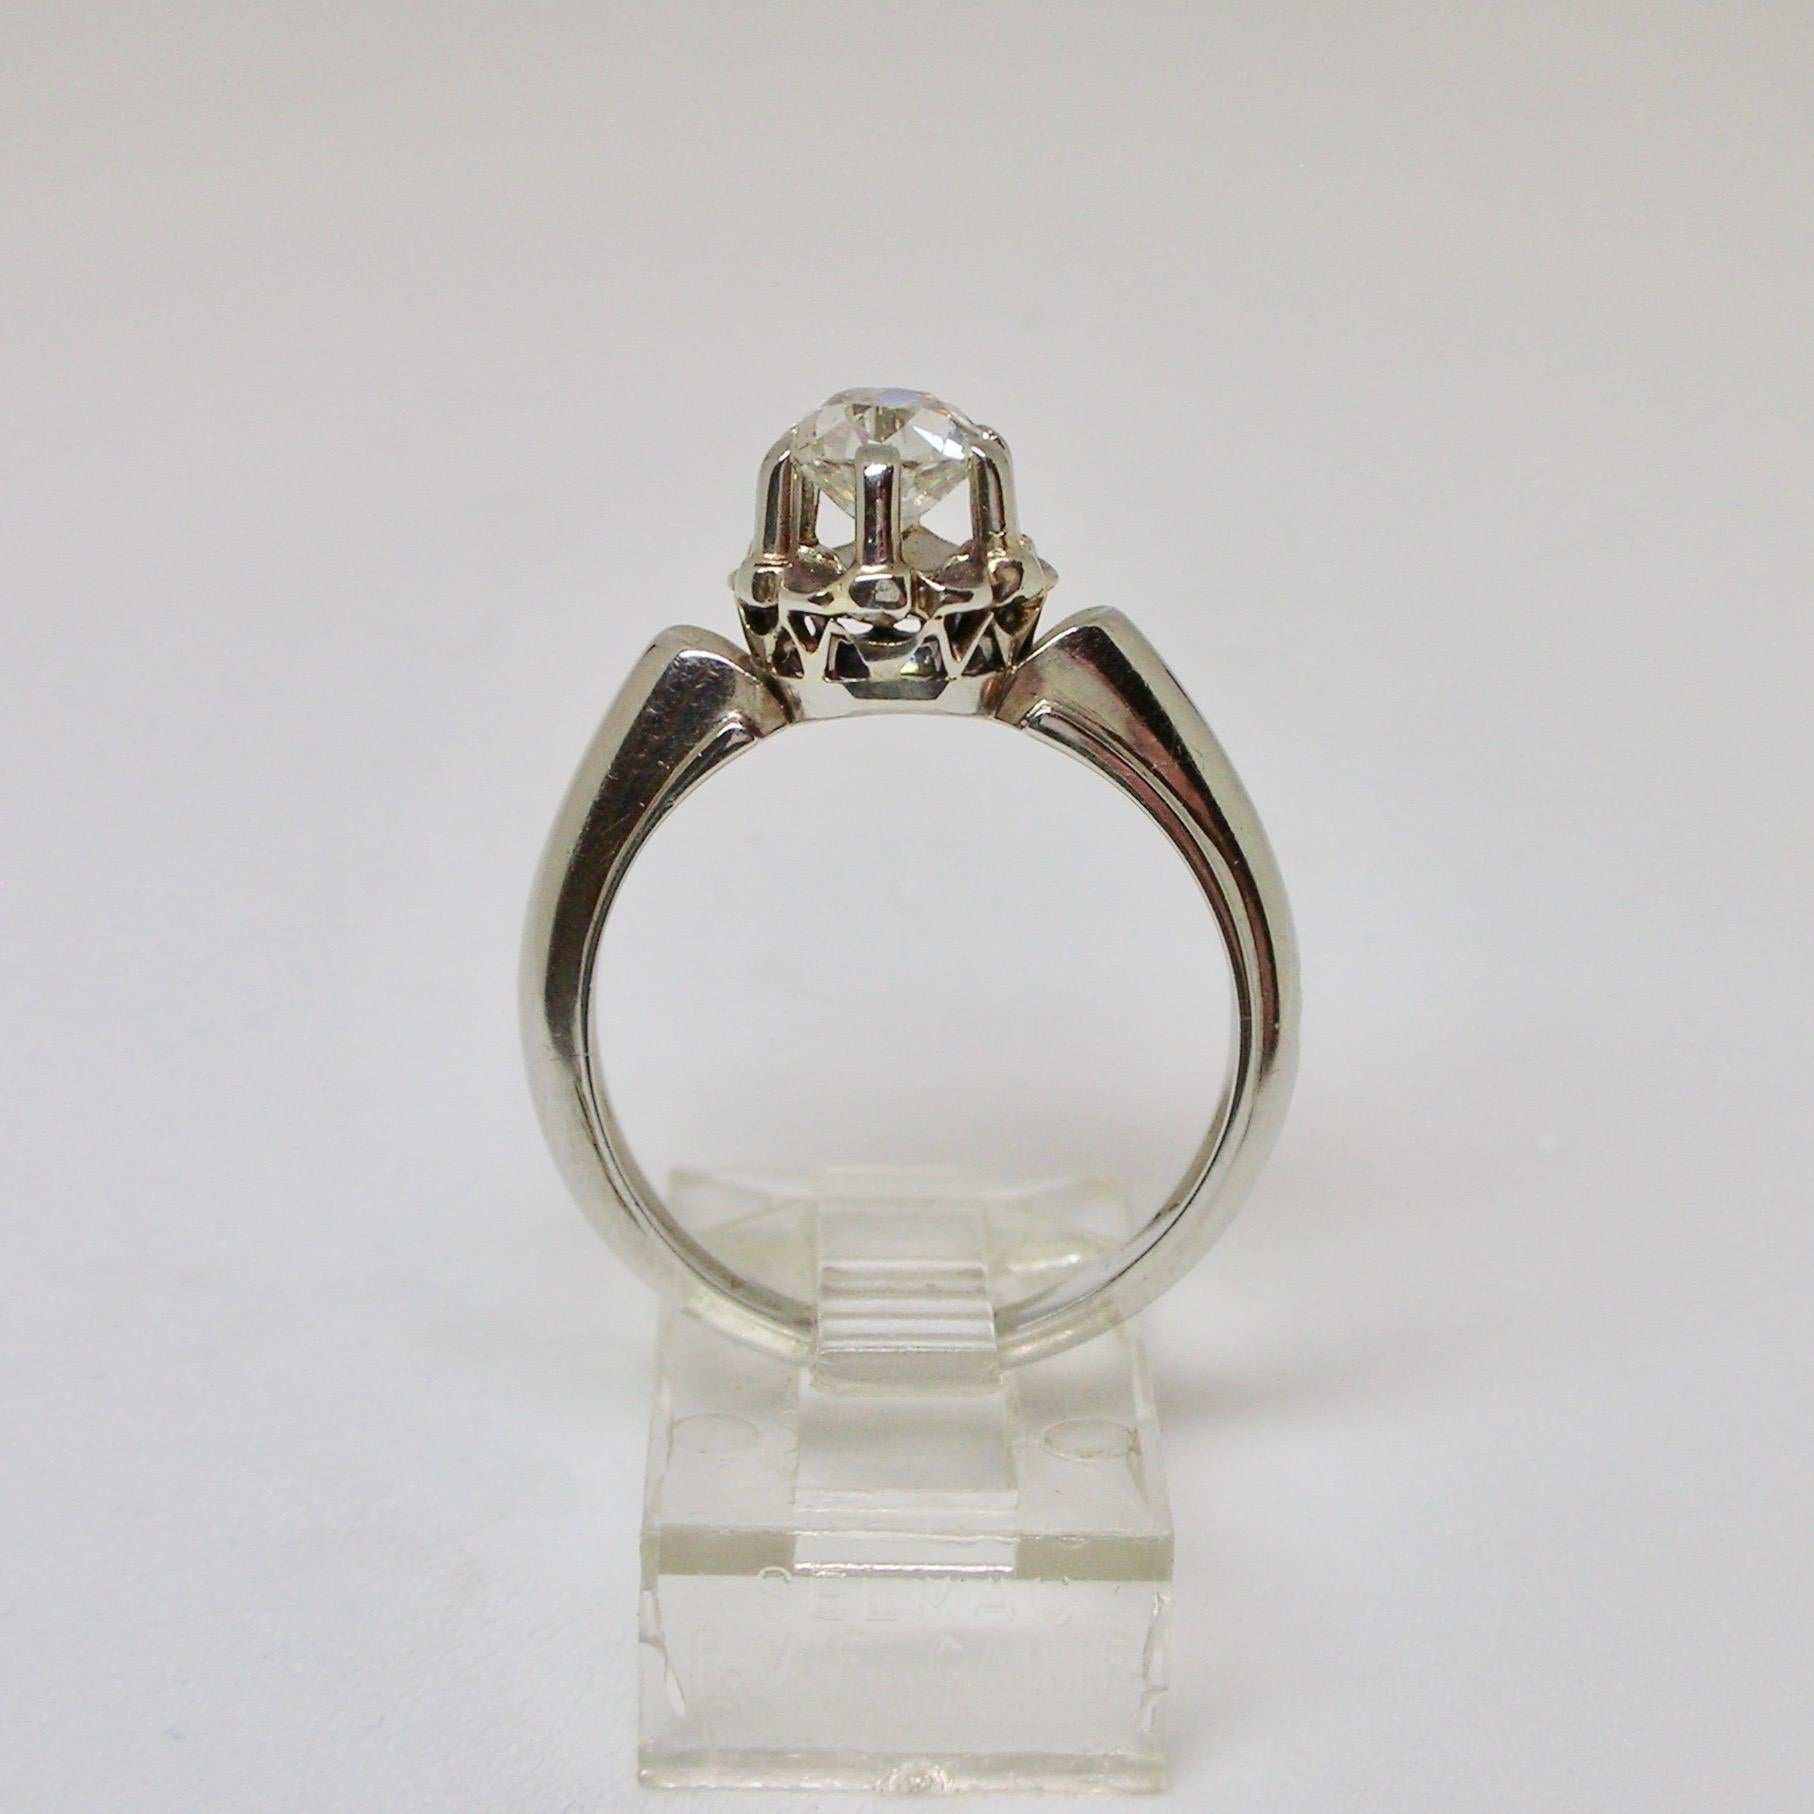 1940s solitaire engagement ring set in 18ct white gold with an old euro cut diamond of approximately 0.80ct, estimated colour J - K, estimated clarity VVS. The piece is stamped with a lictor's fasces indicating it was made in Italy between 1934 and